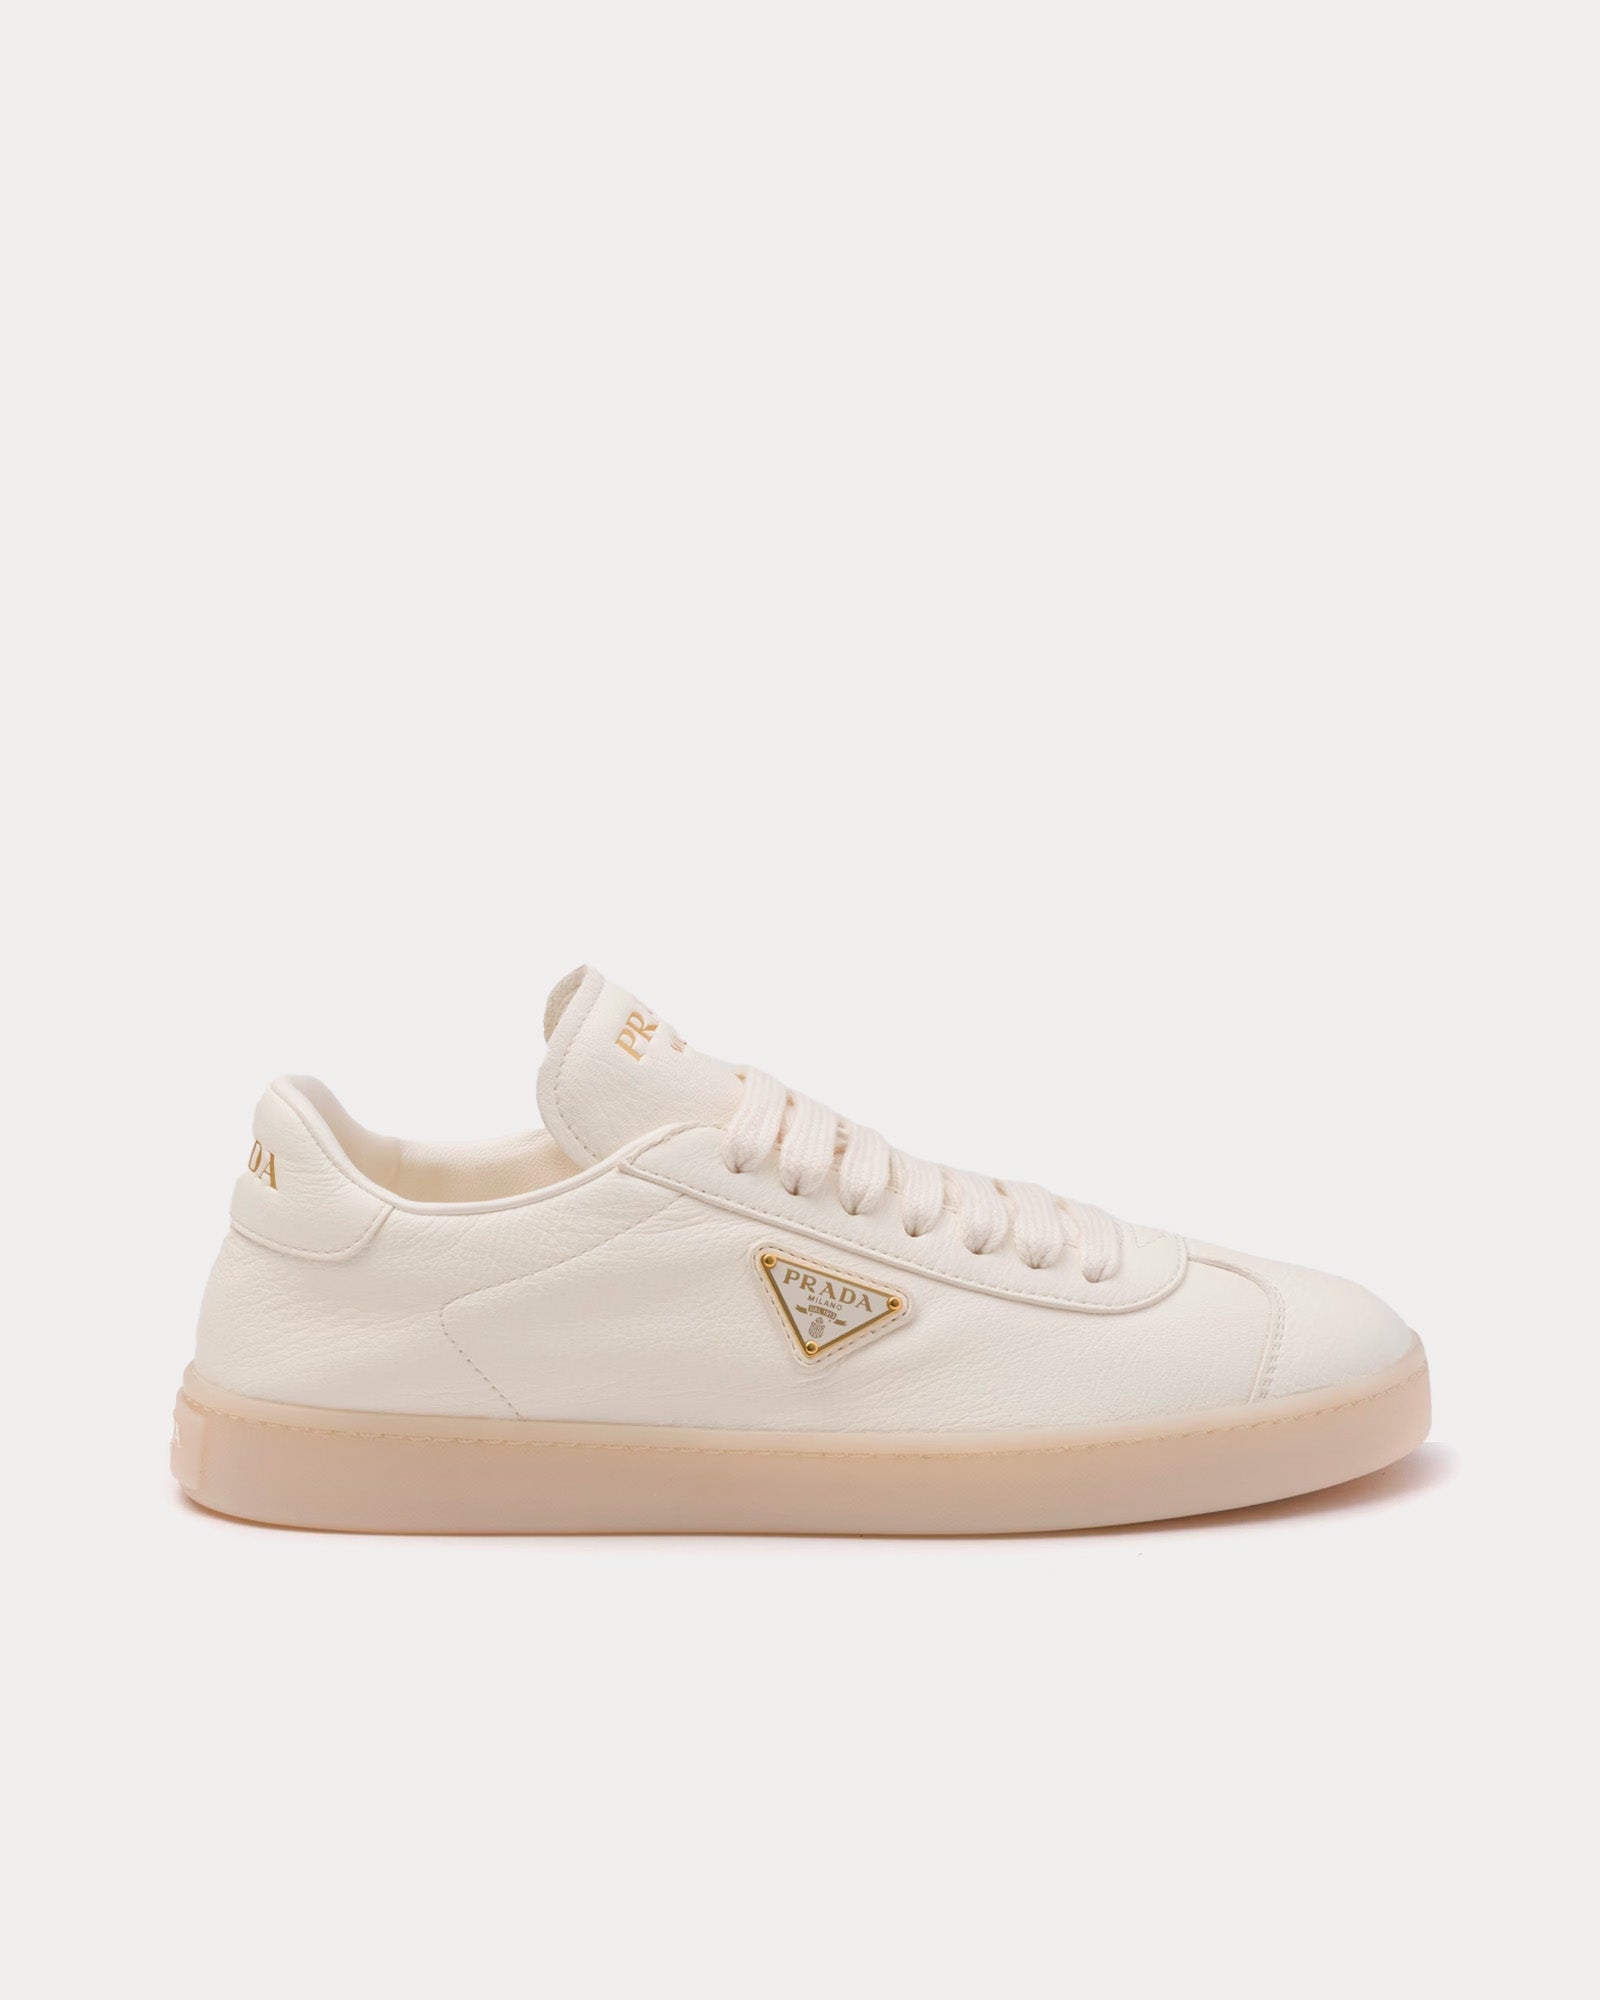 Prada - Leather Ivory Low Top Sneakers